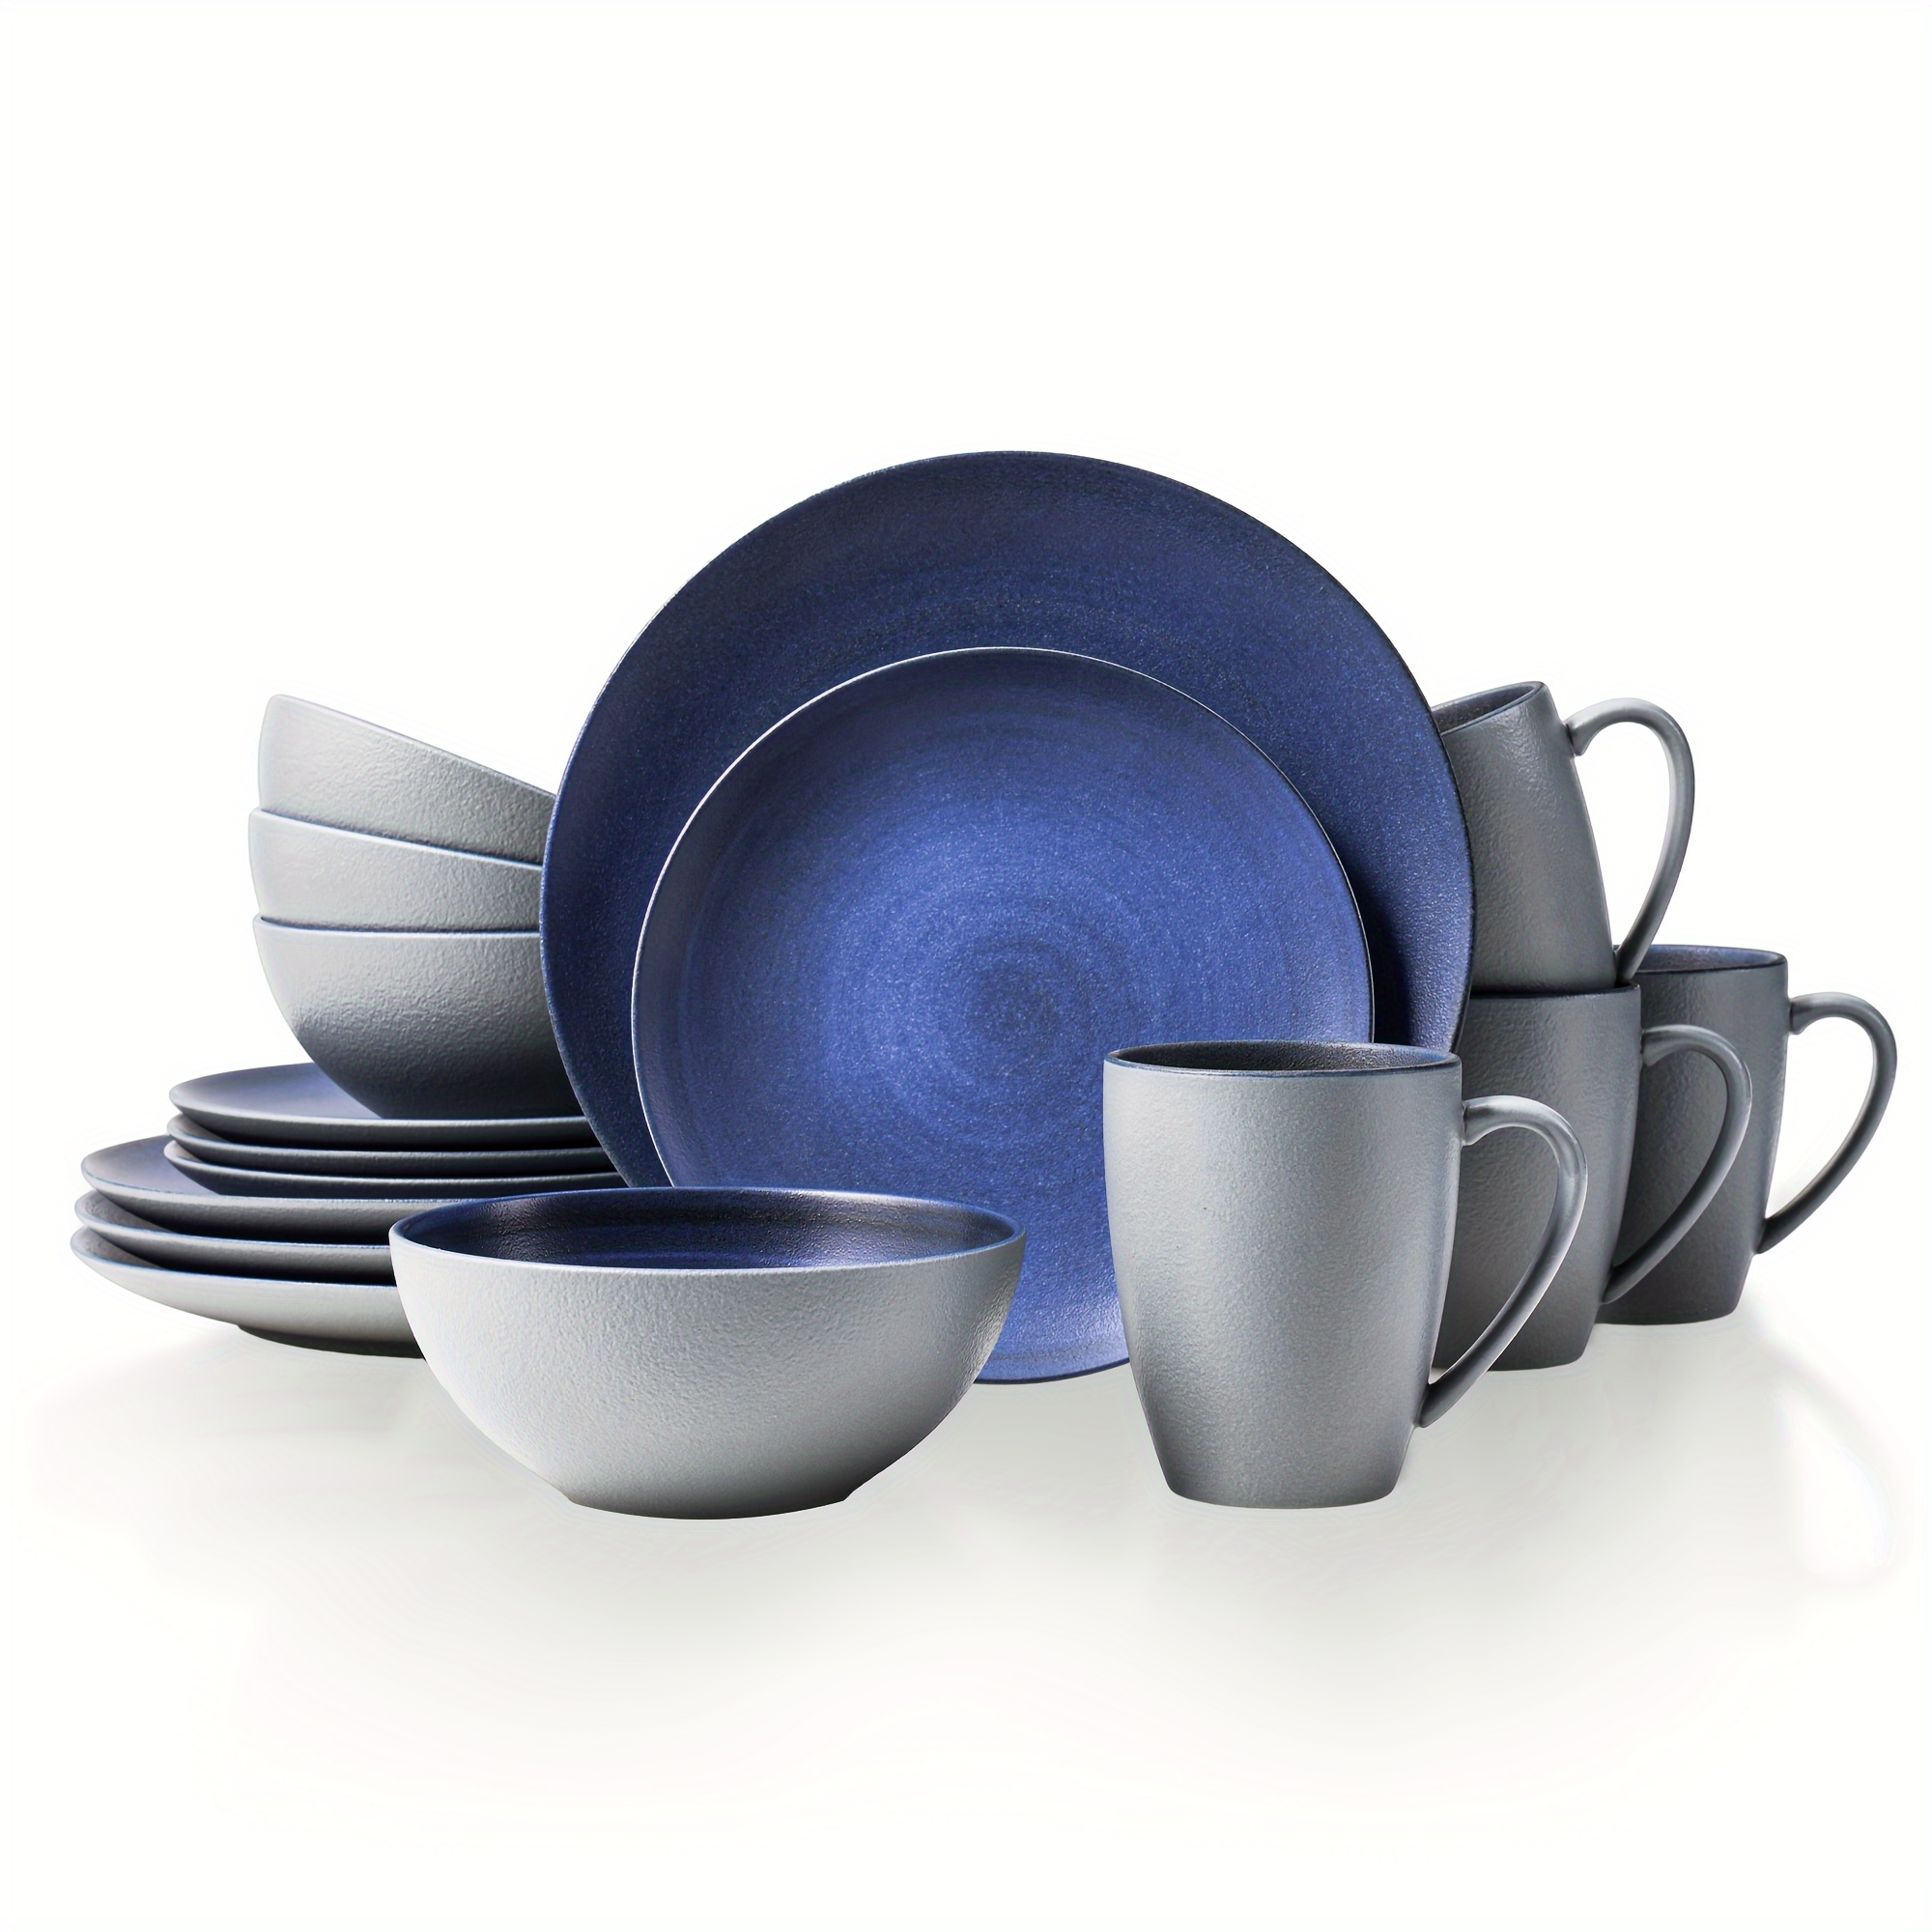 

Larinest 16-piece Dinnerware Sets, Plates And Bowls Sets, Plates, Bowls And Mugs, Service For 4, Microwave And Dishwasher Safe, Porcelain Chip And Scratch Resistant, Blue